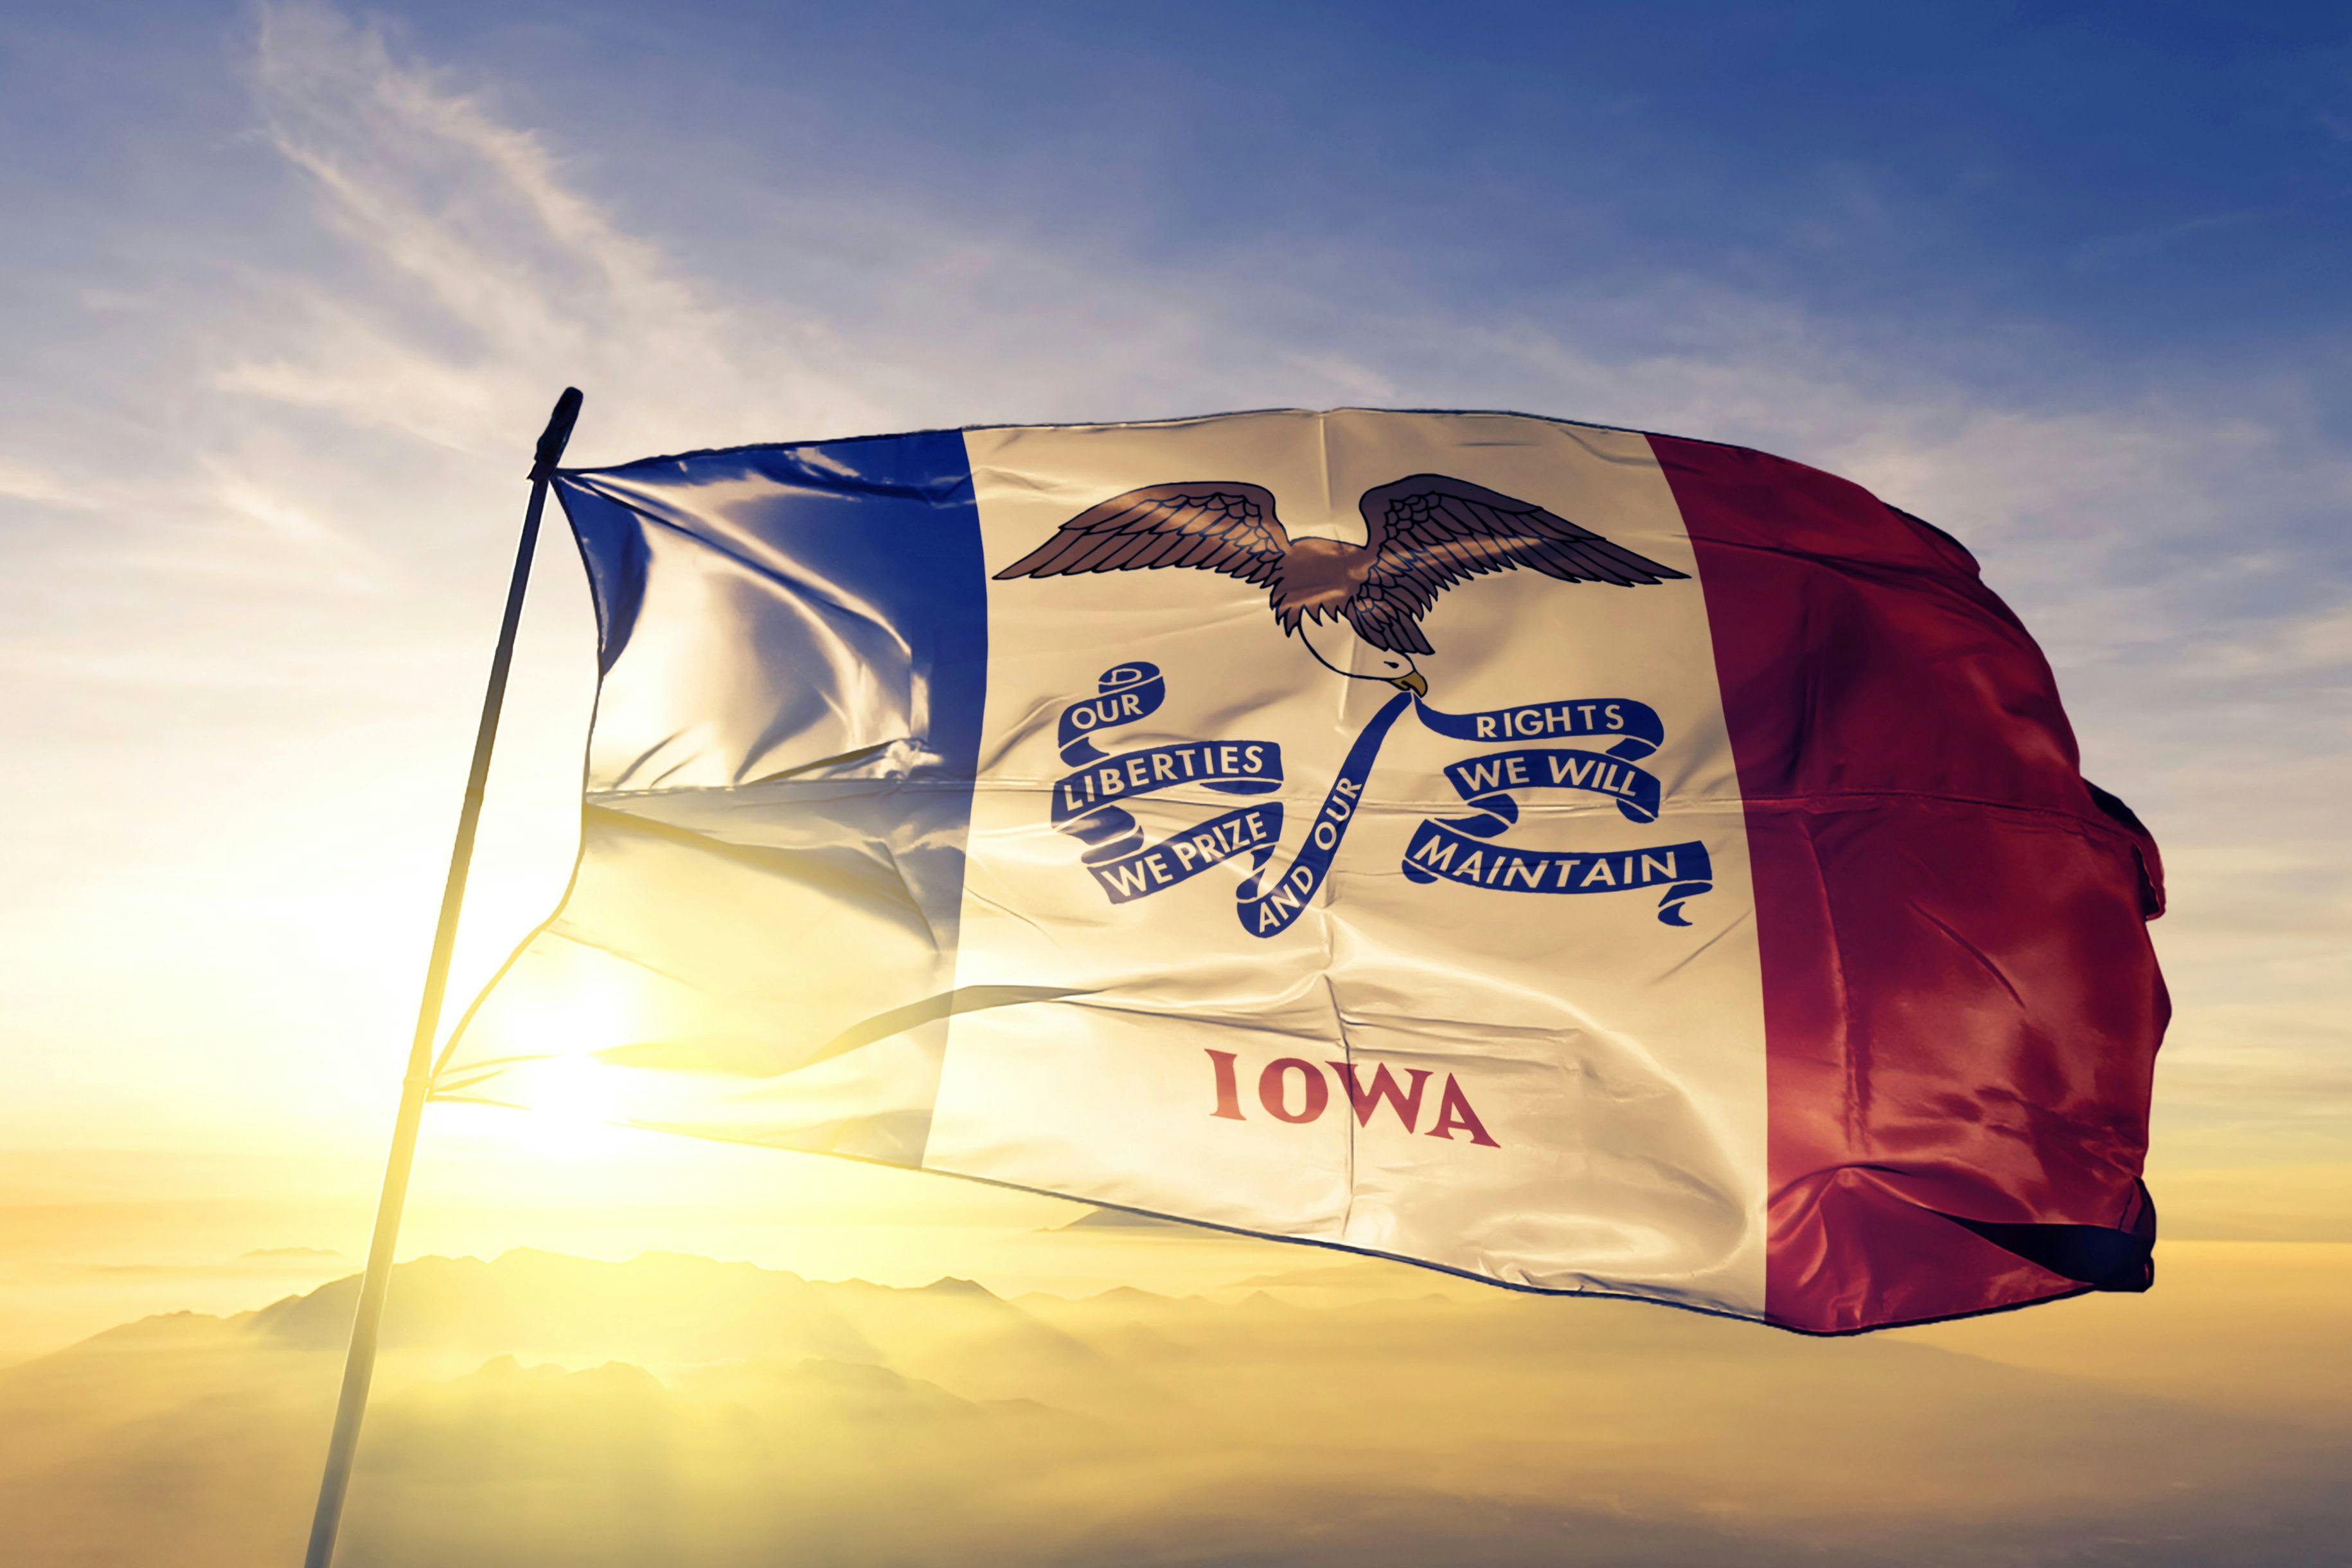 Two Lawsuits Allege Iowa Medicaid Did Not Provide Proper Mental Health Care